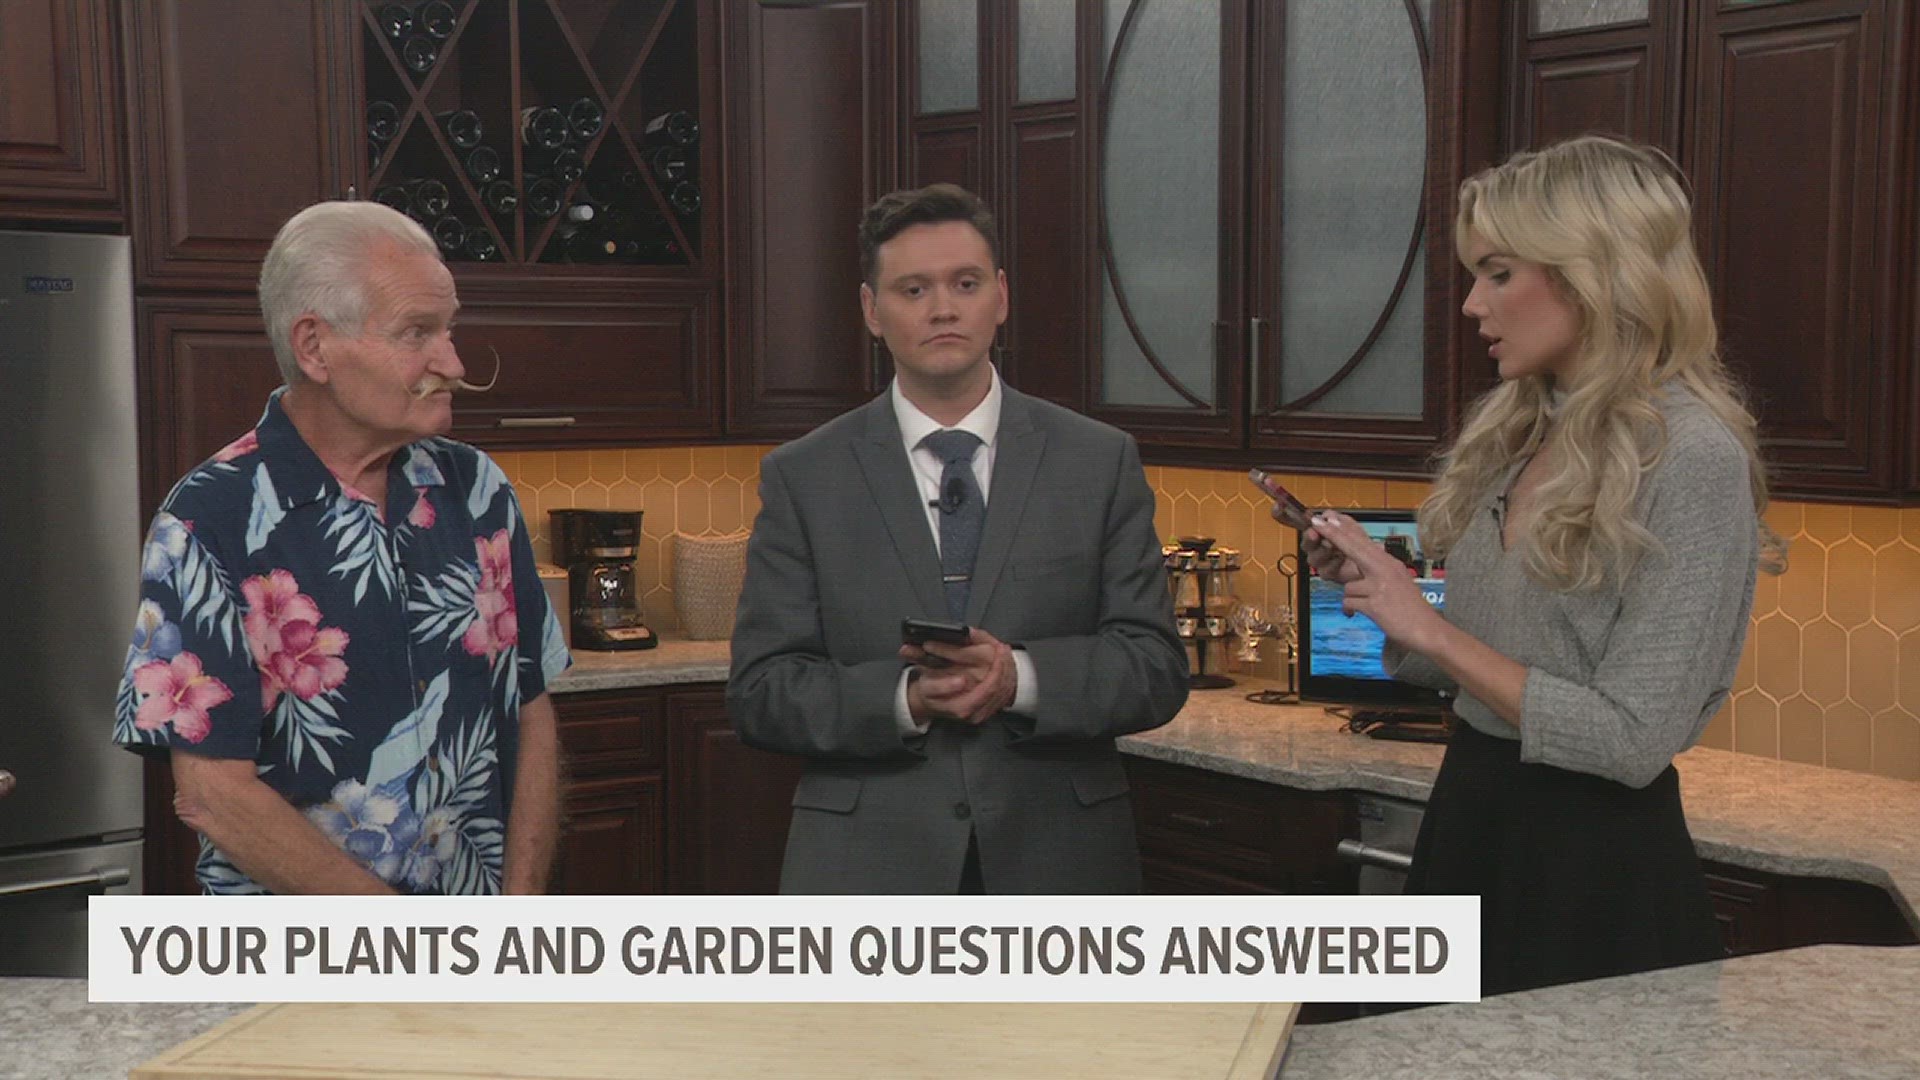 Craig Hignight answers your plants and garden questions every single Wednesday on WQAD. Join us on Facebook to have your question answered!